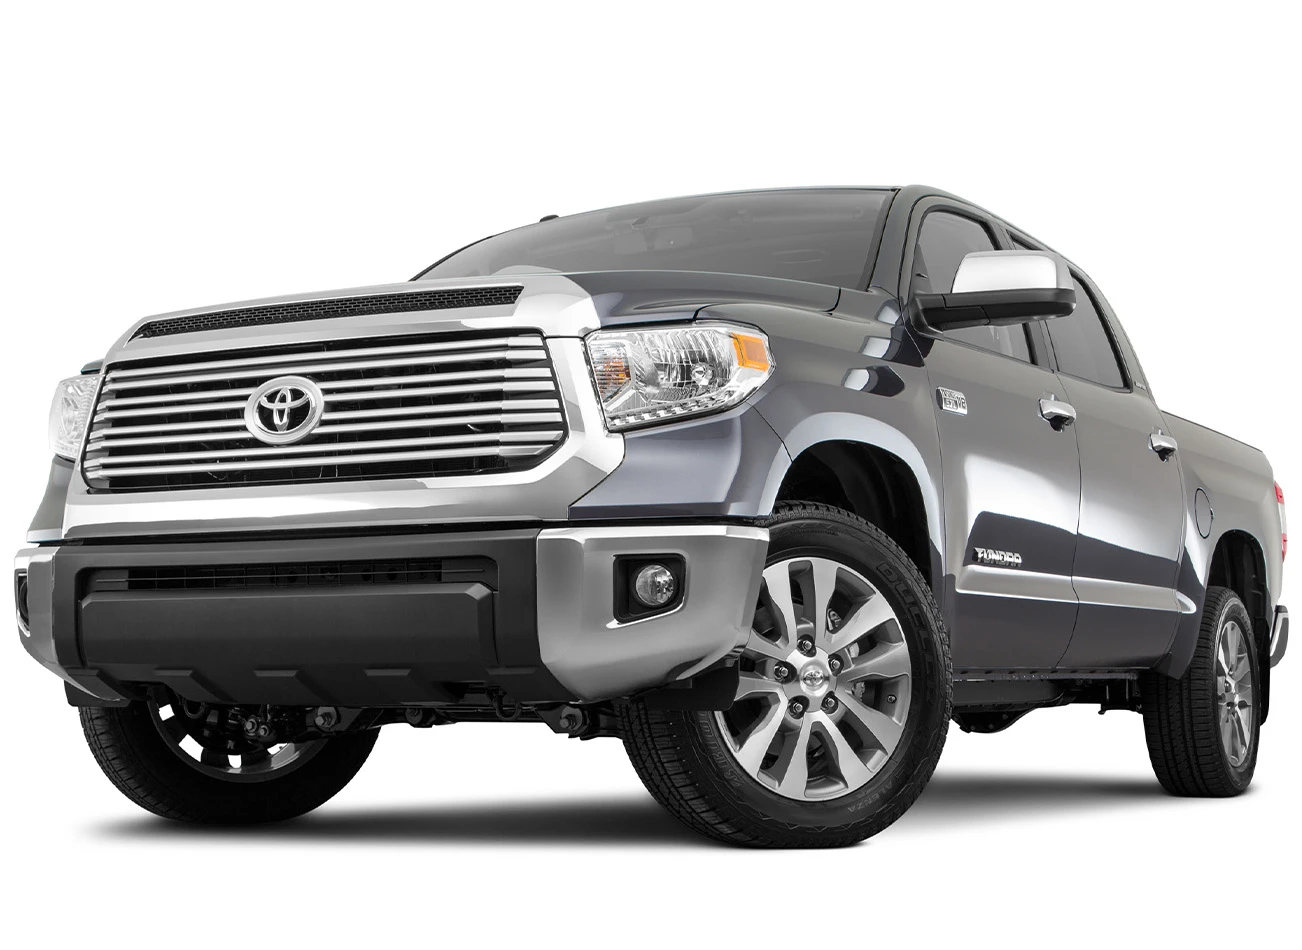 2016 Toyota Tundra: Front view of truck | CarMax